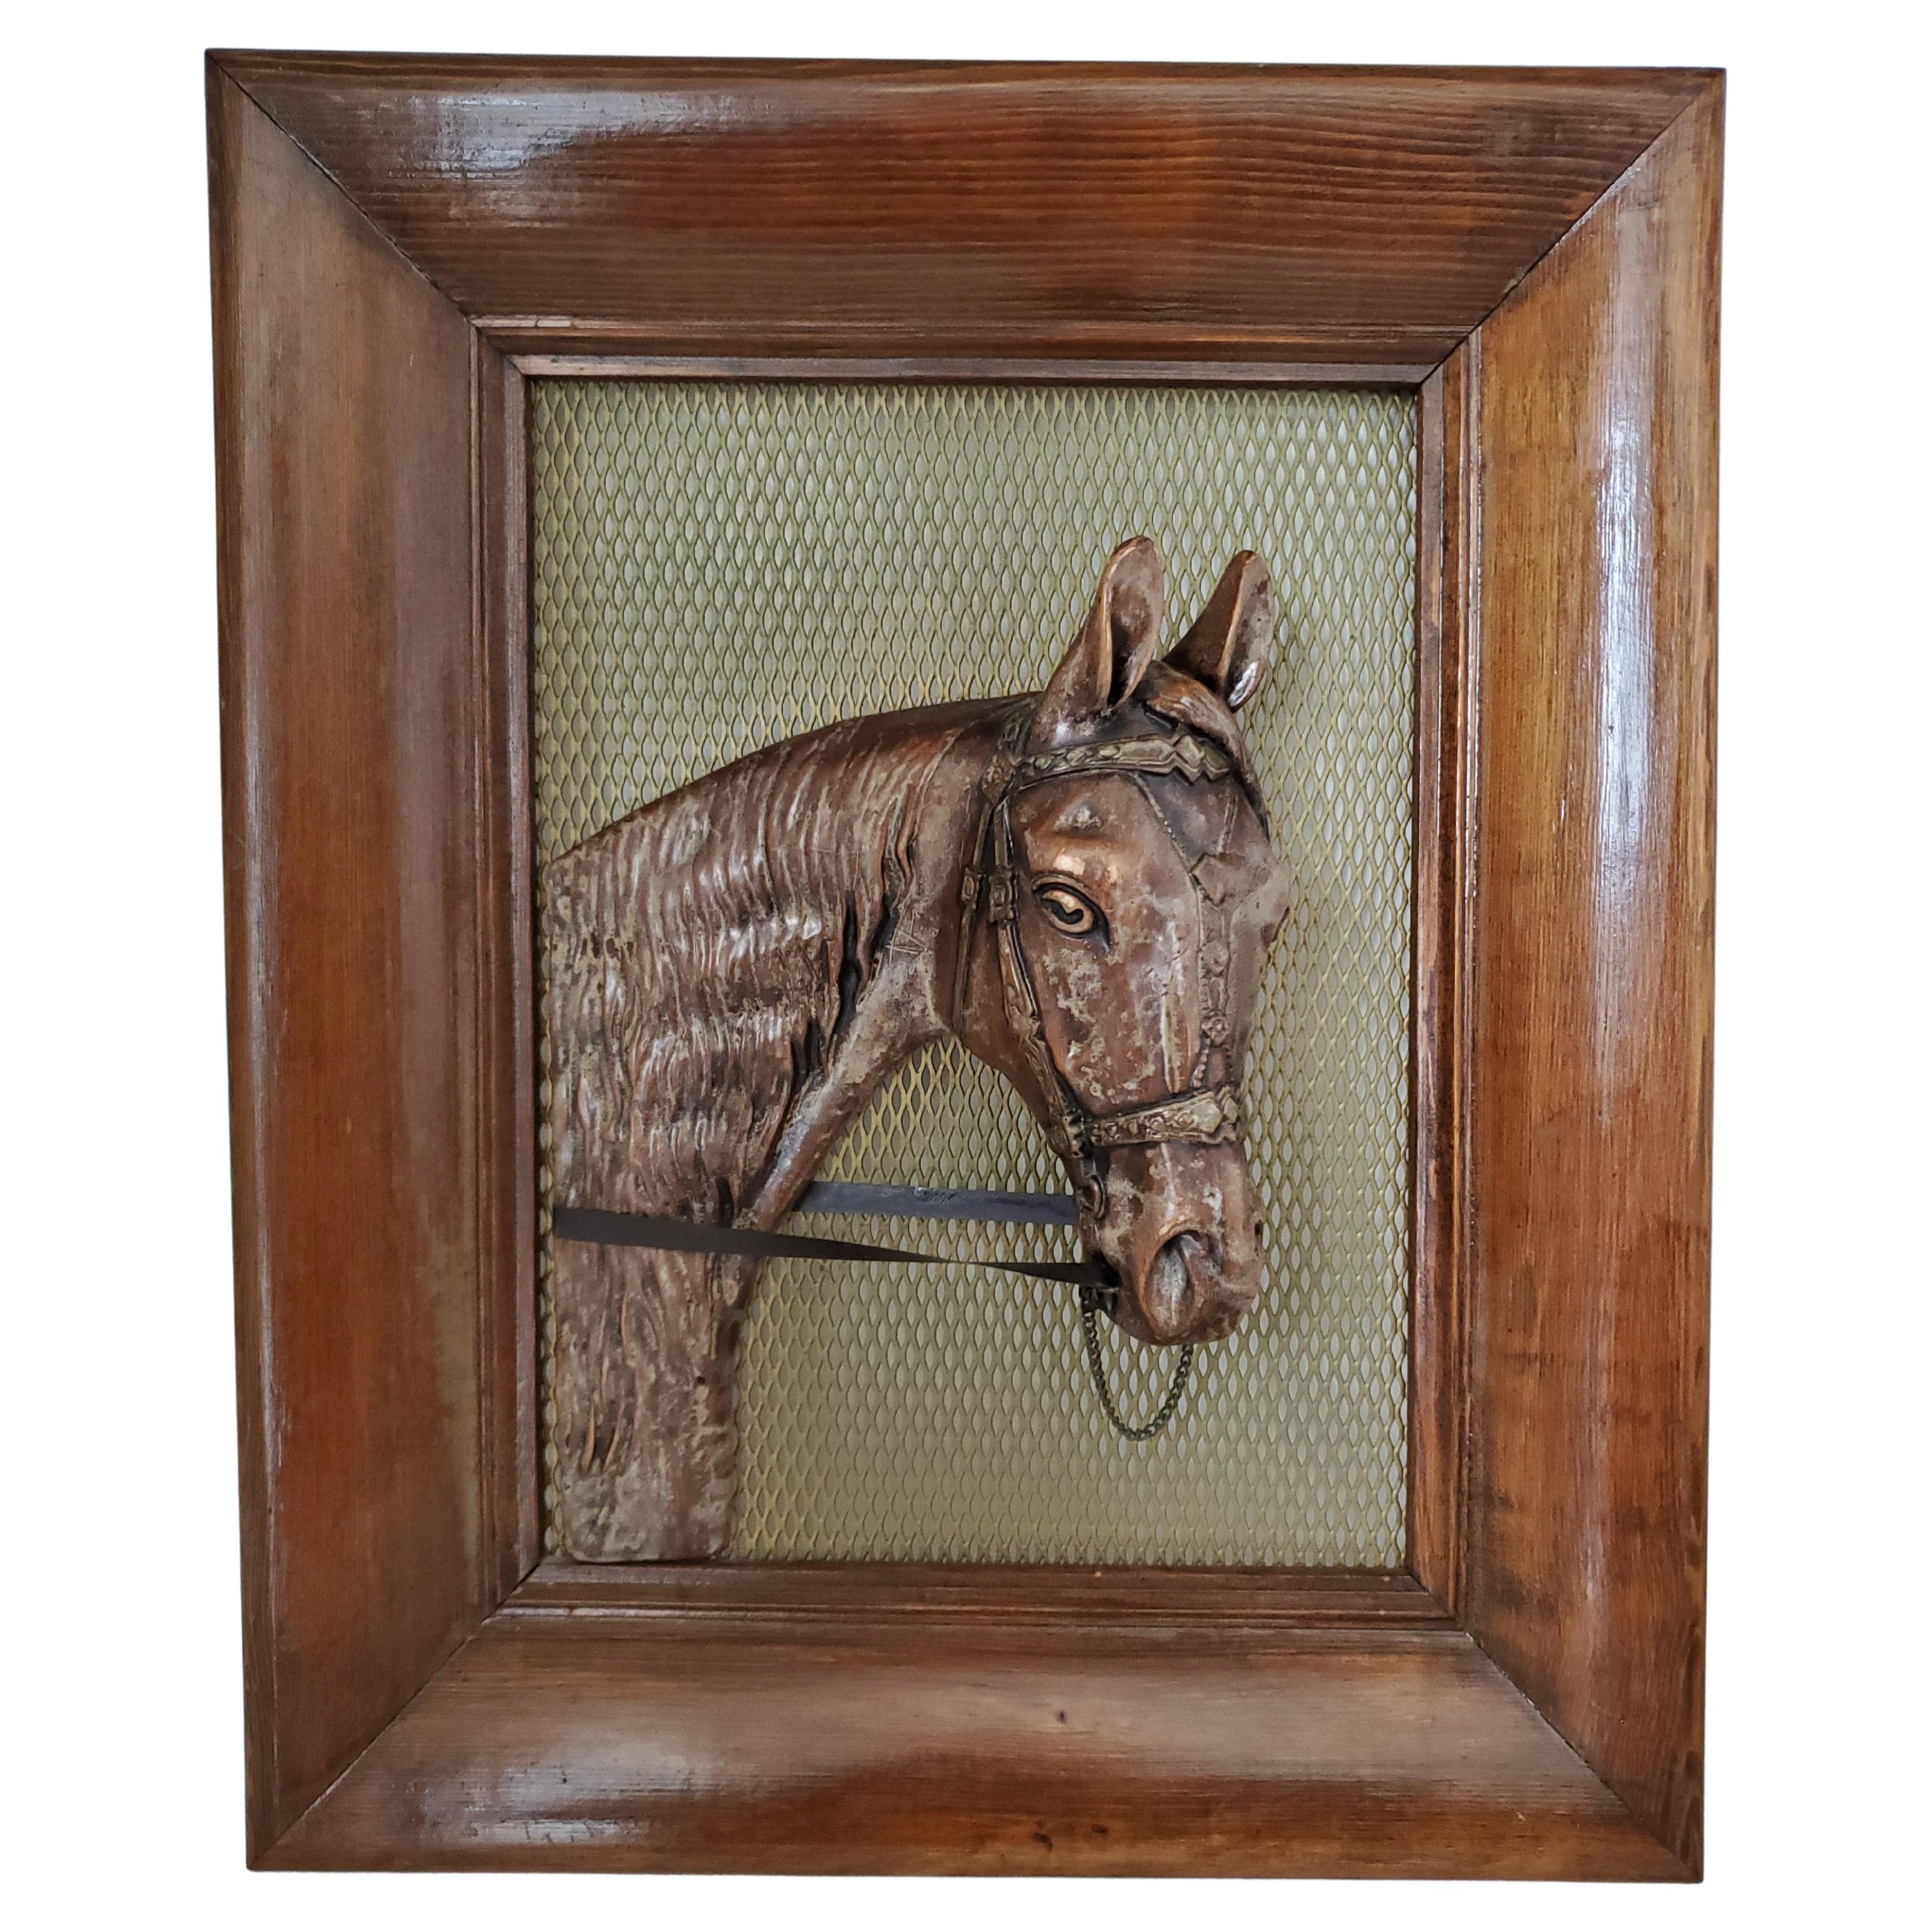 Antique Framed and Mounted Copper Horse Head in Relief on Mesh Screen